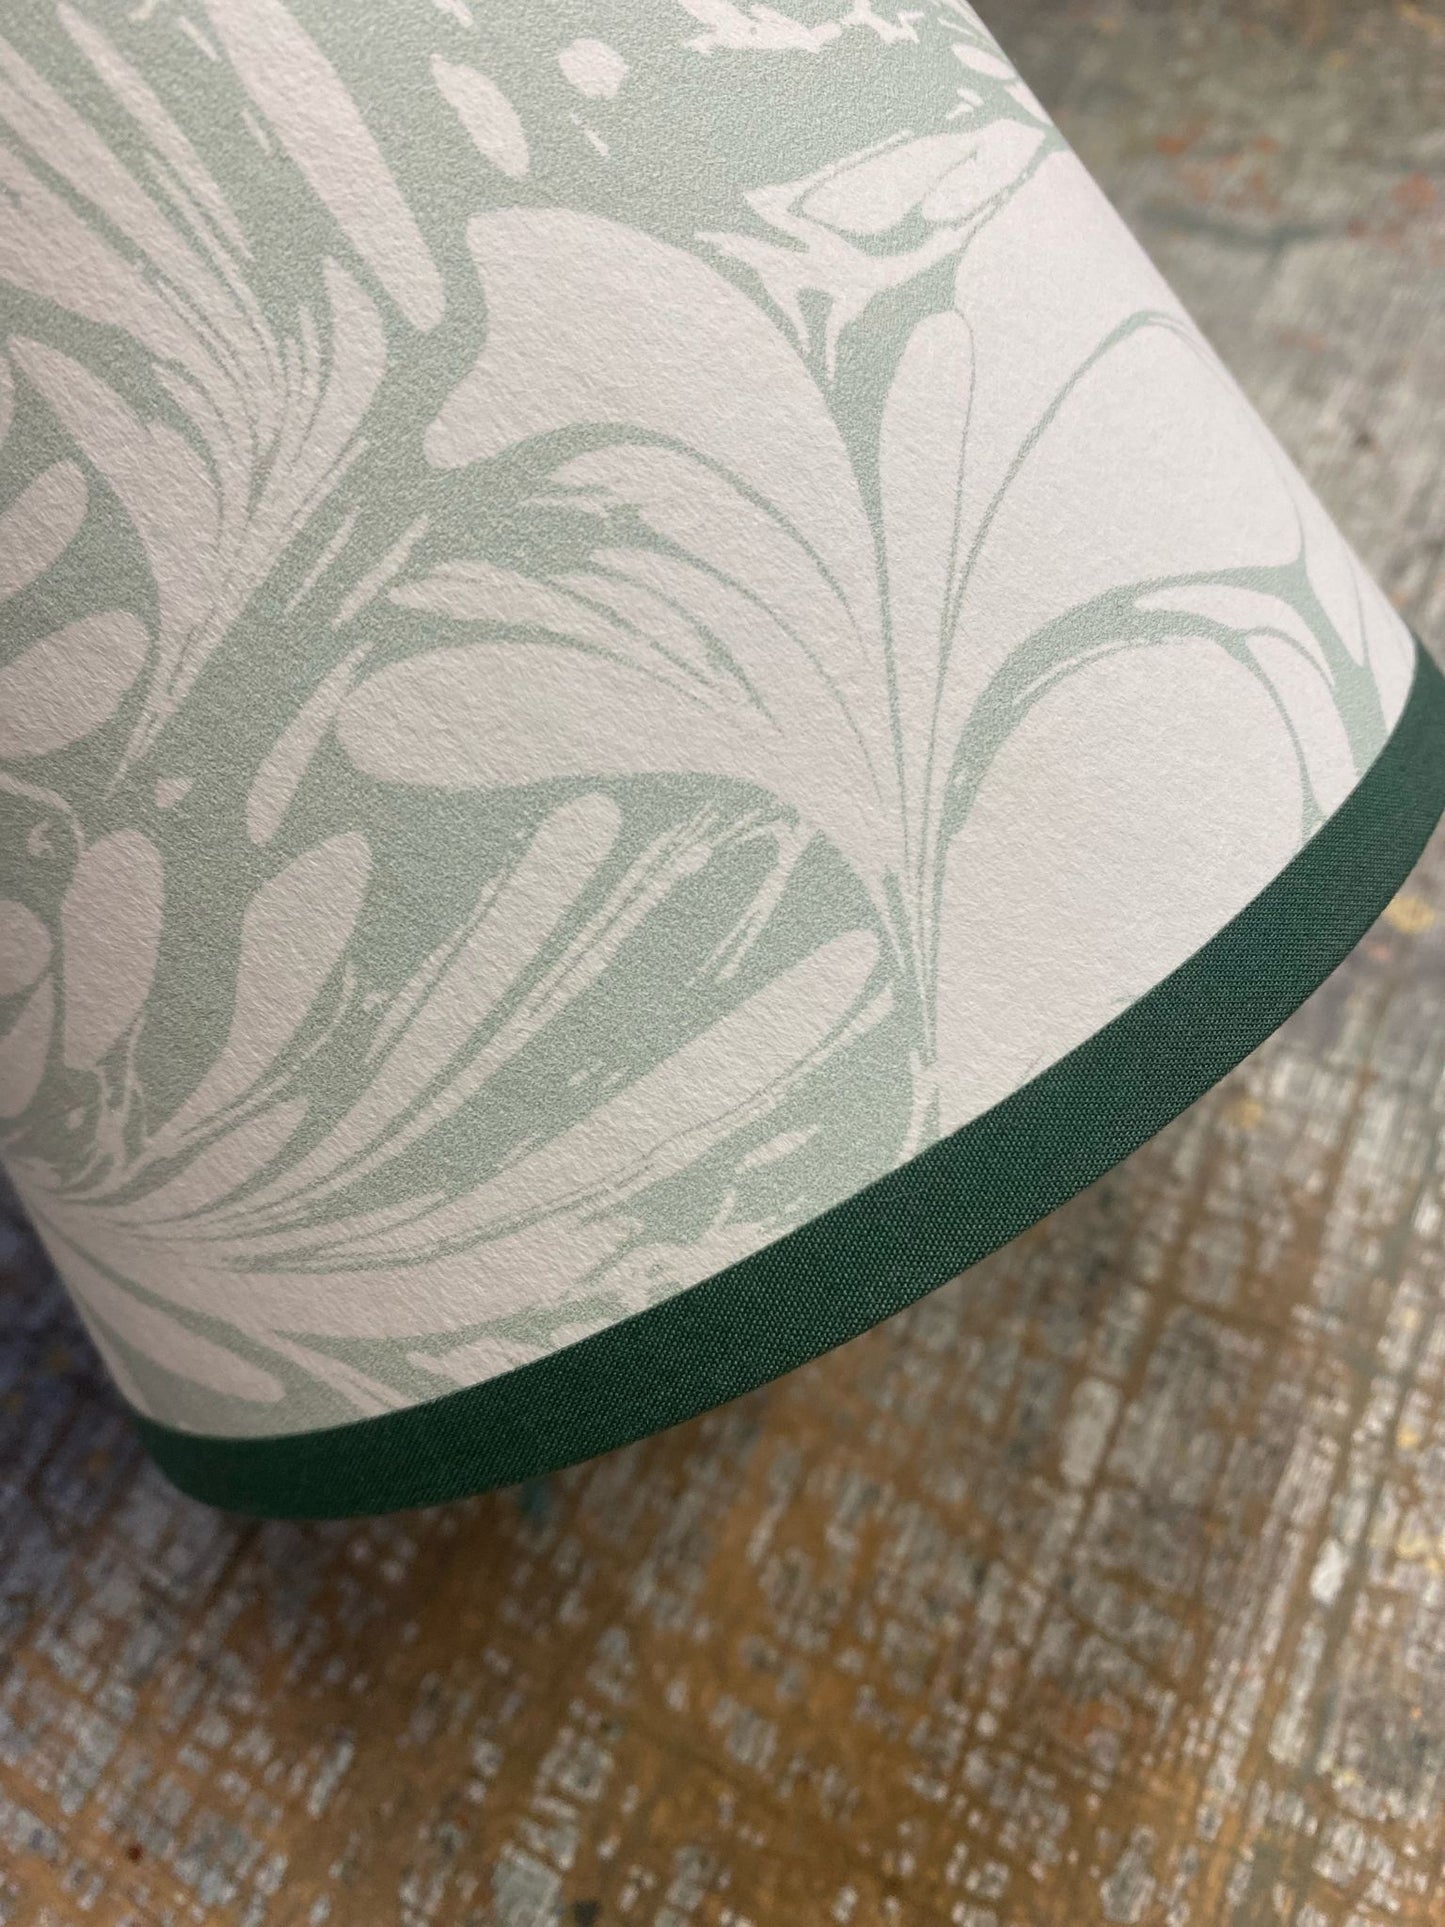 House of Amitié Marbled Paper Lampshade - Flourish Willow - Empire - Size Small